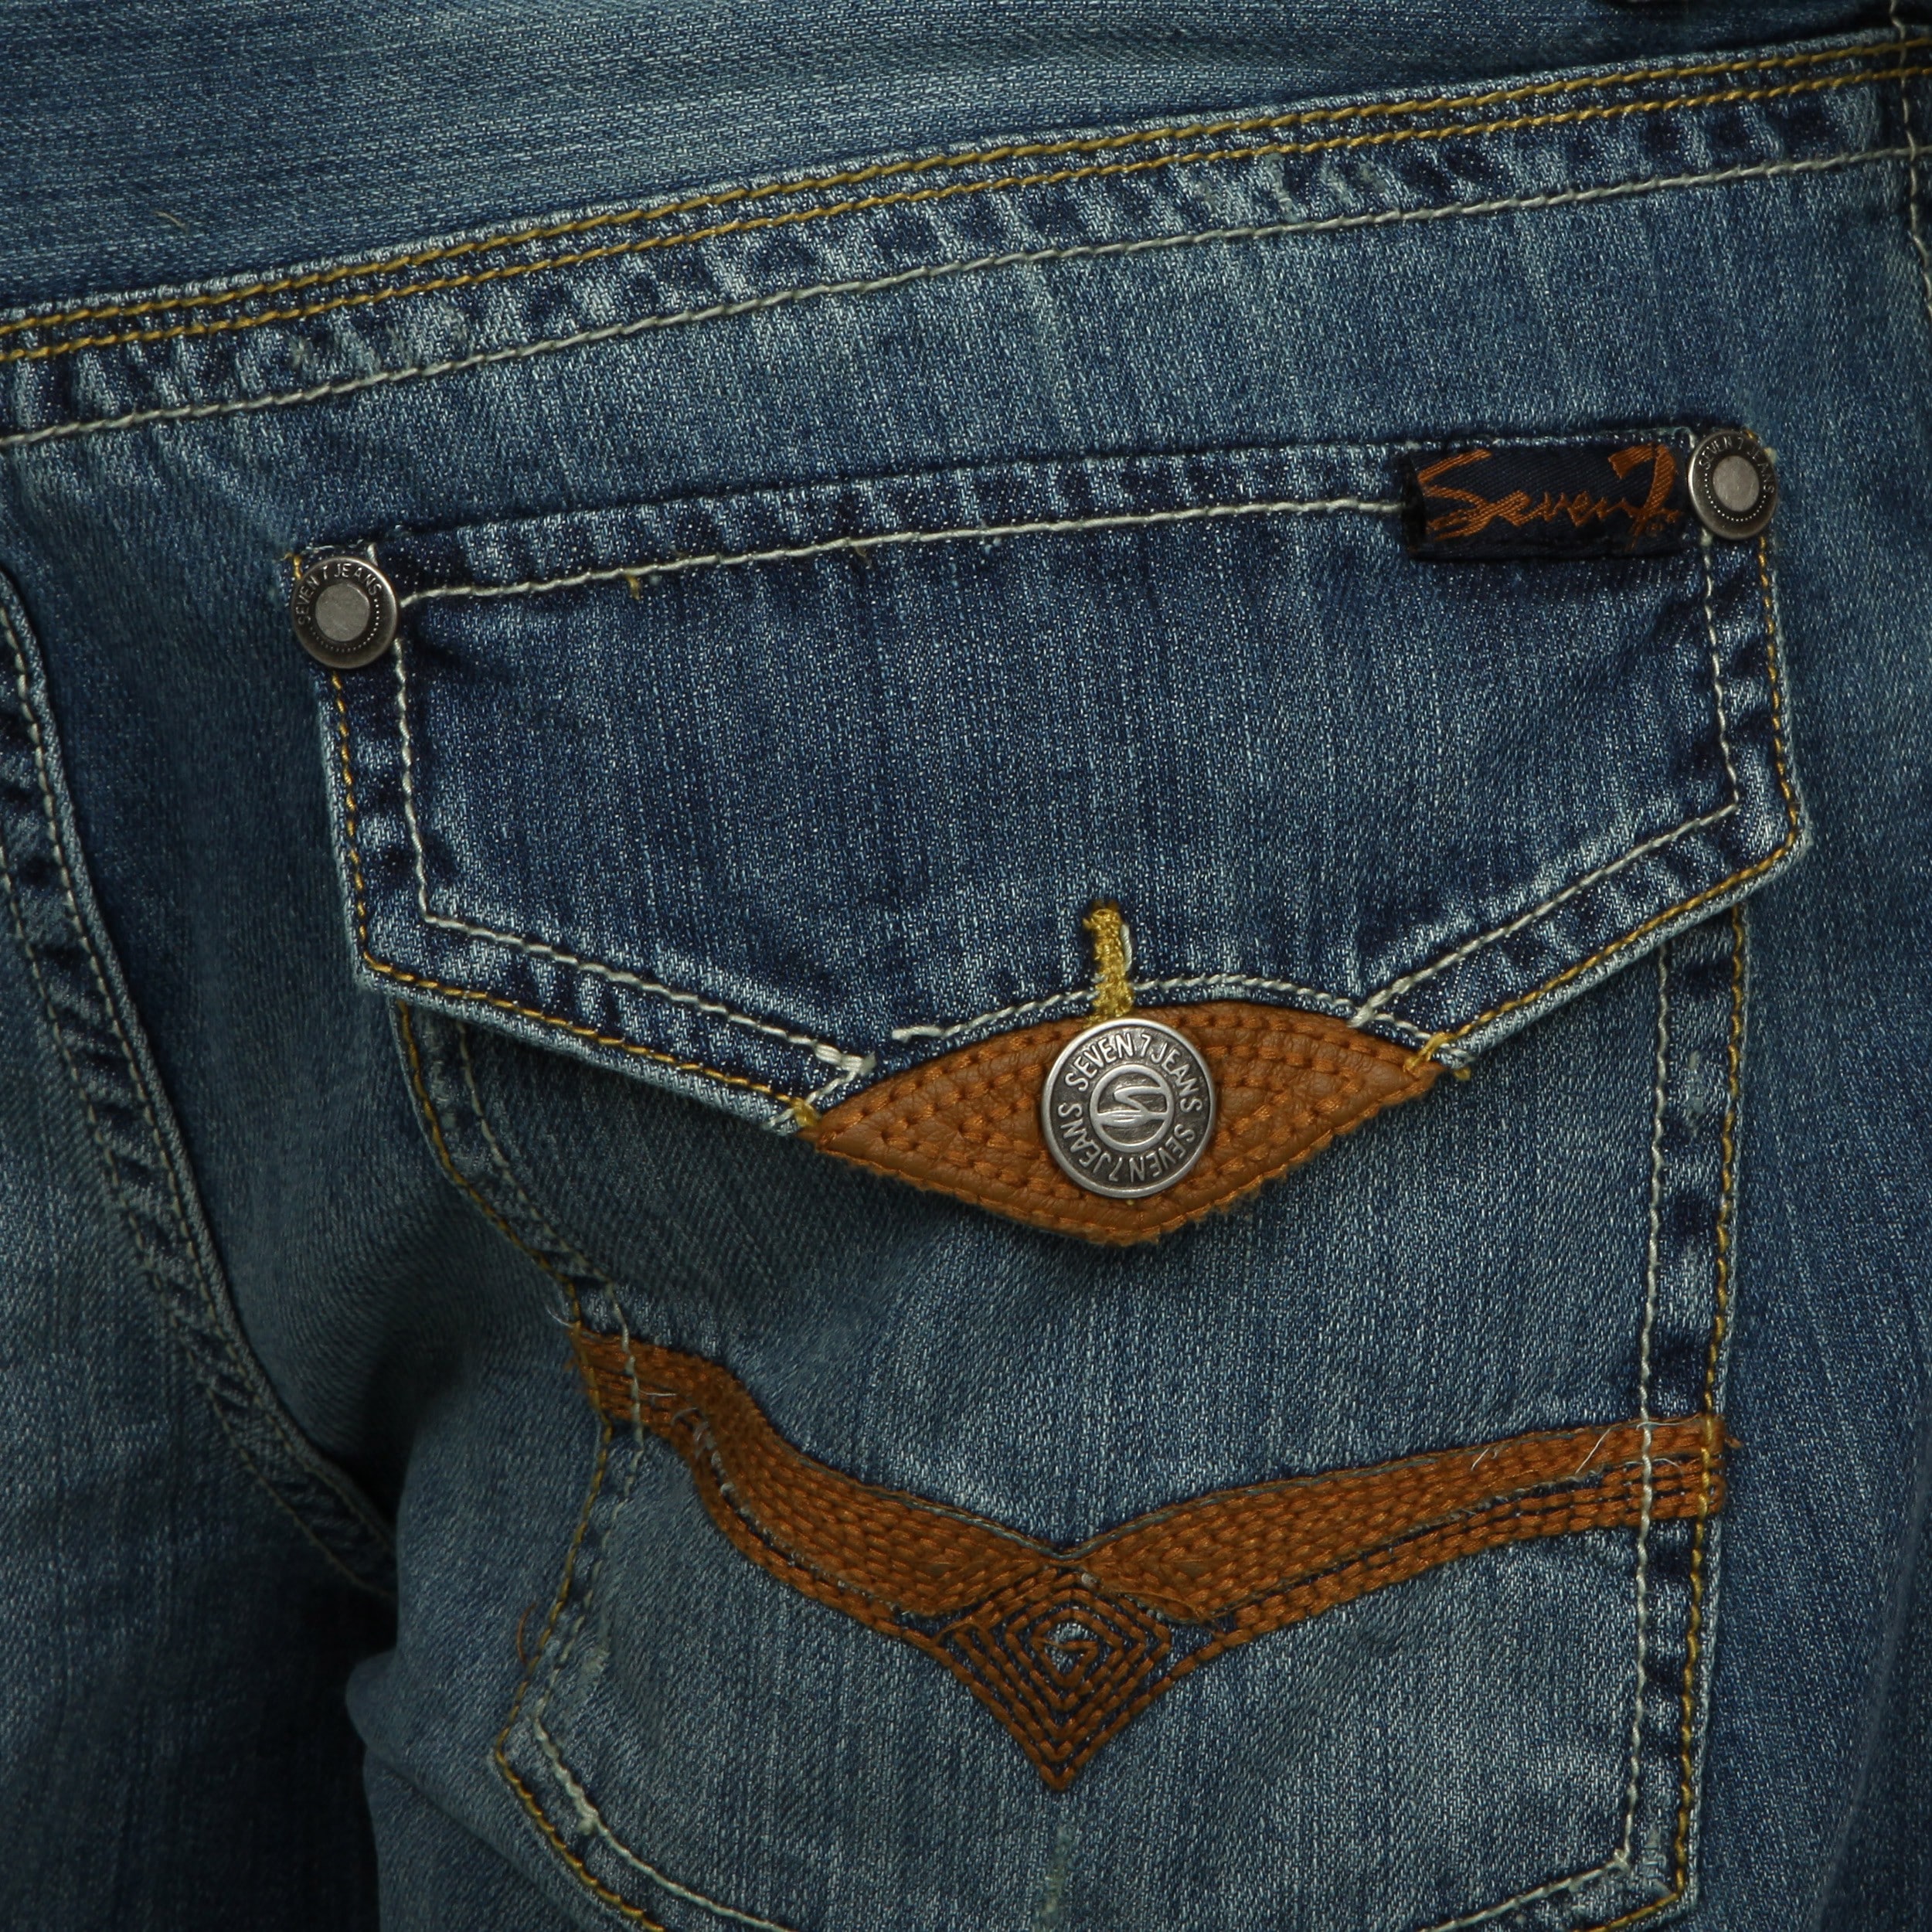 mens jeans with button back pockets